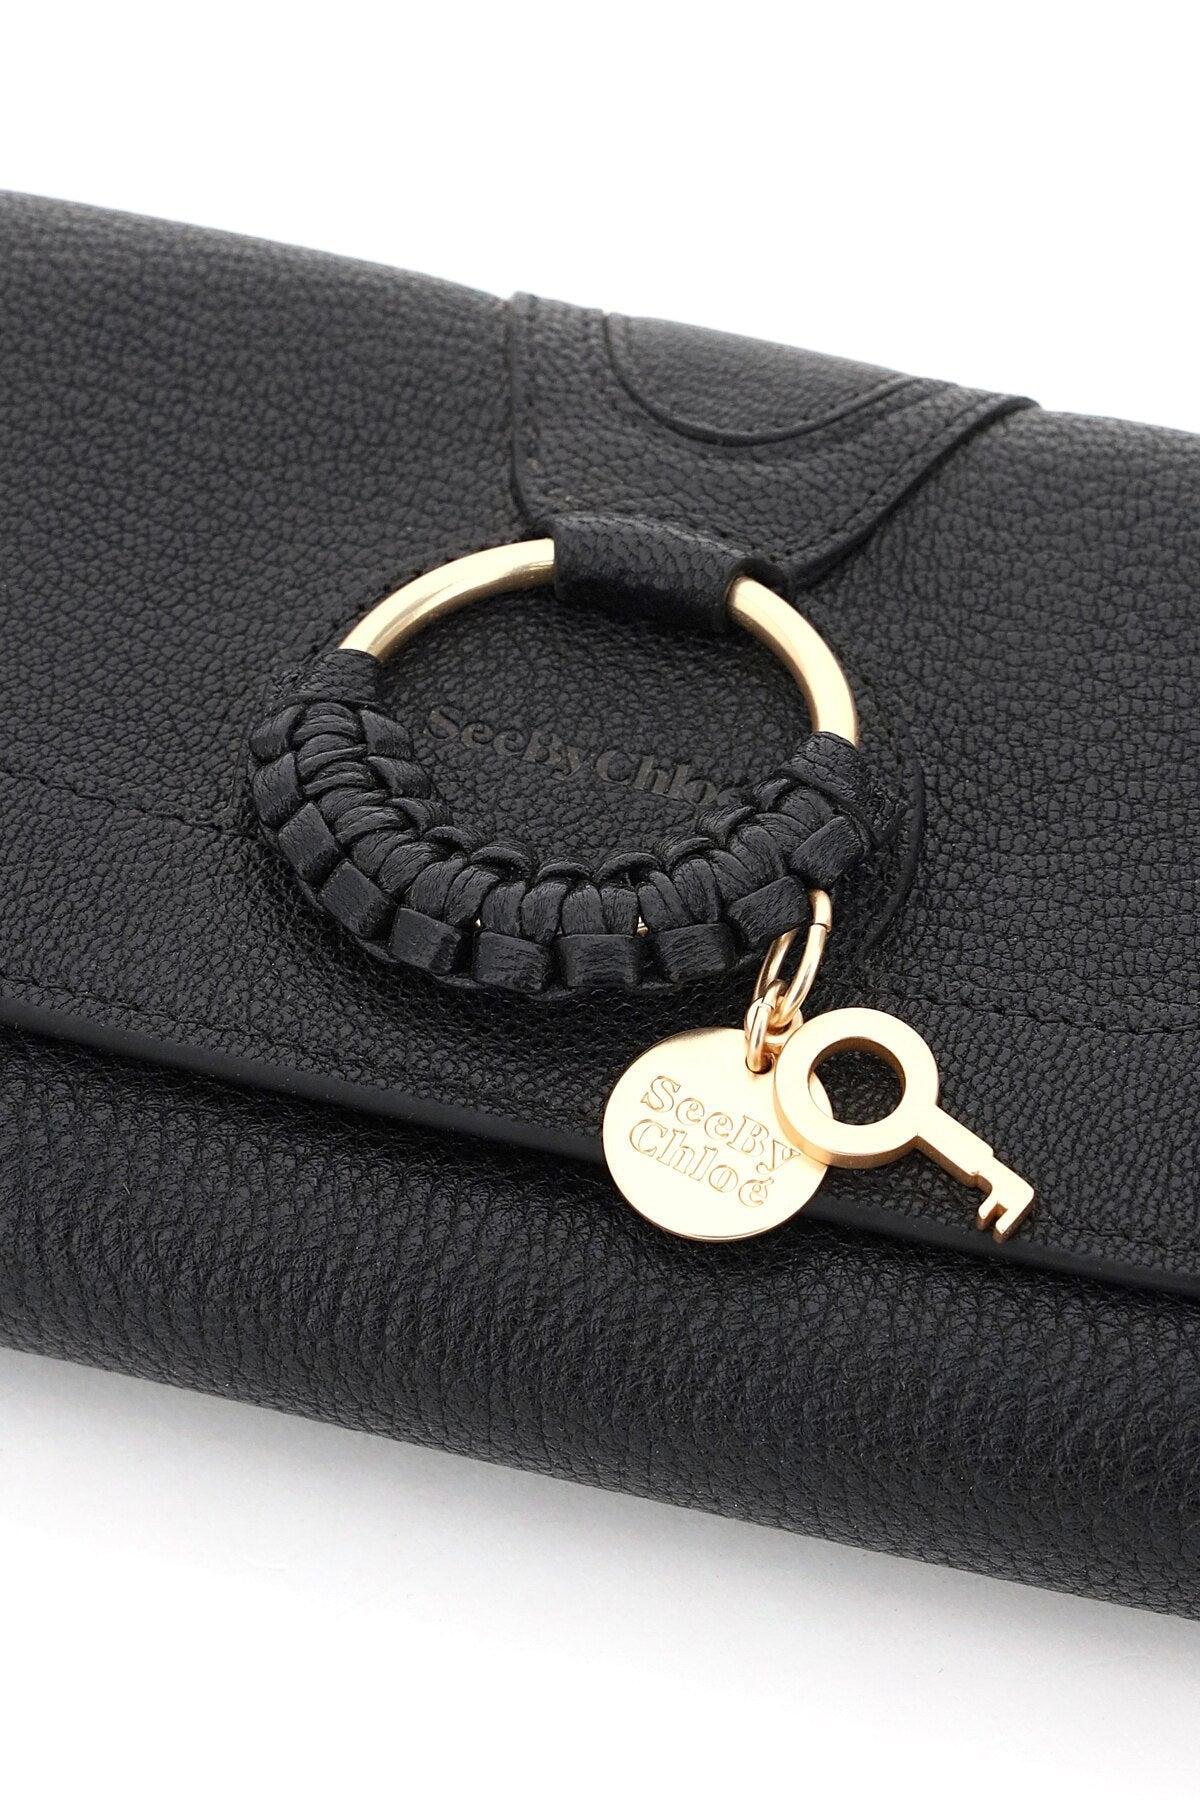 See By Chloé Hana Clutch With Chain in Black | Lyst